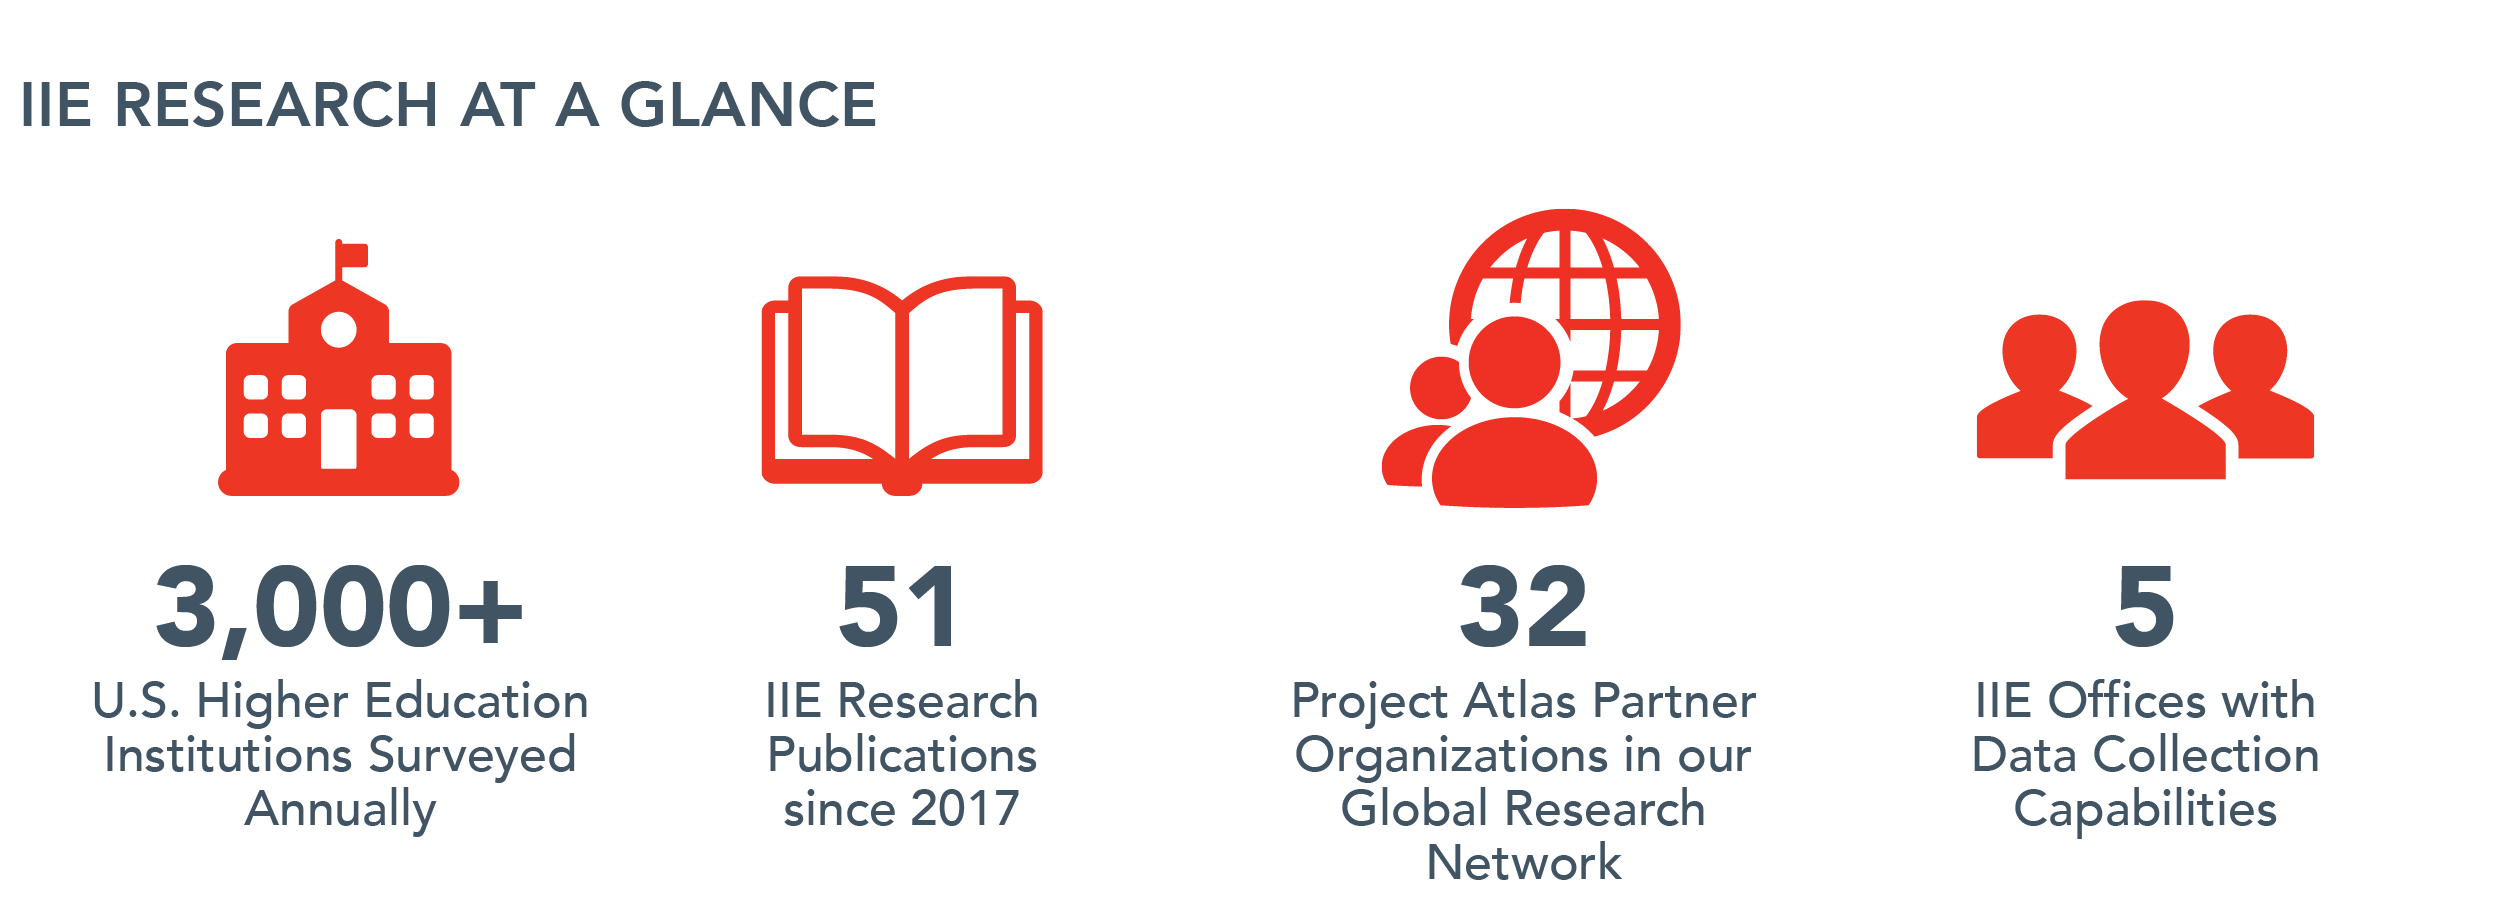 Infographic showing Research numbers of 3,000+ US Higher Education Institutions Surveyed Annually, 51 Research publications published since 2017, 32 Project Atlas partner orgs, and 5 IIE offices with Data collection capabilities. 